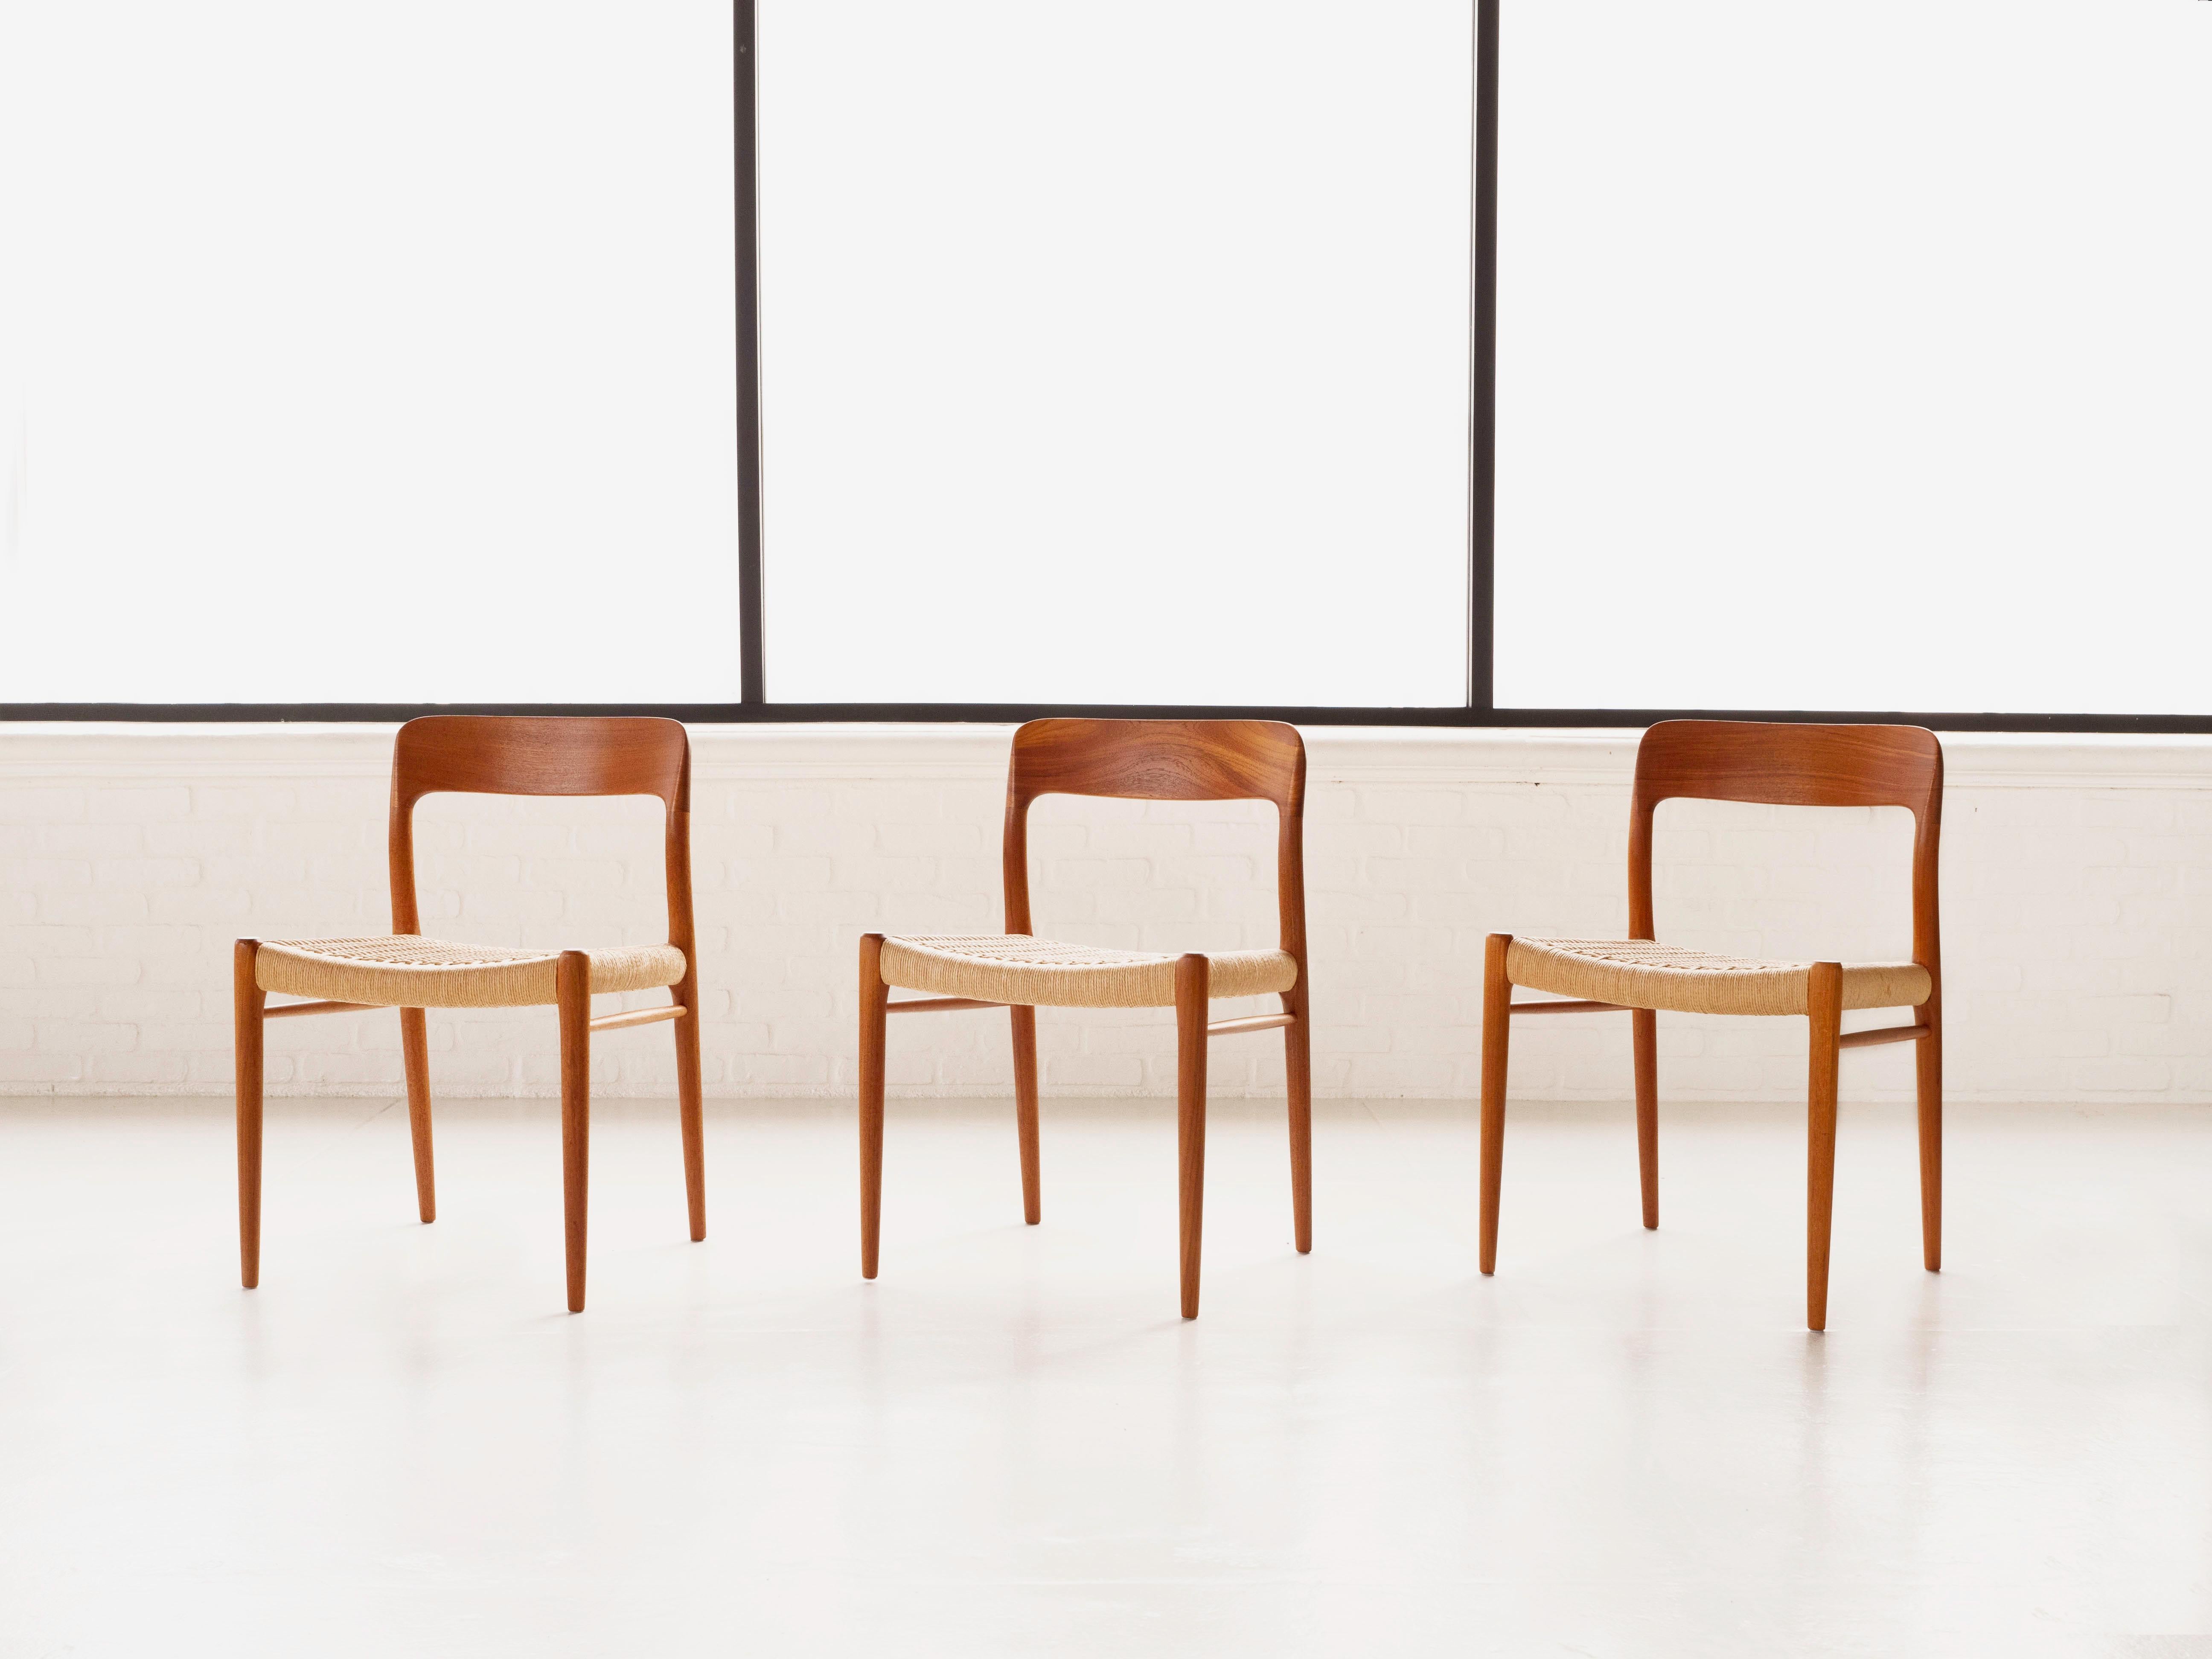 A set of nine (9) solid teak dining chairs by designer Niels Moller for J.L. Mollers Møbelfabrik. Made in Denmark circa 1950's. Model number 